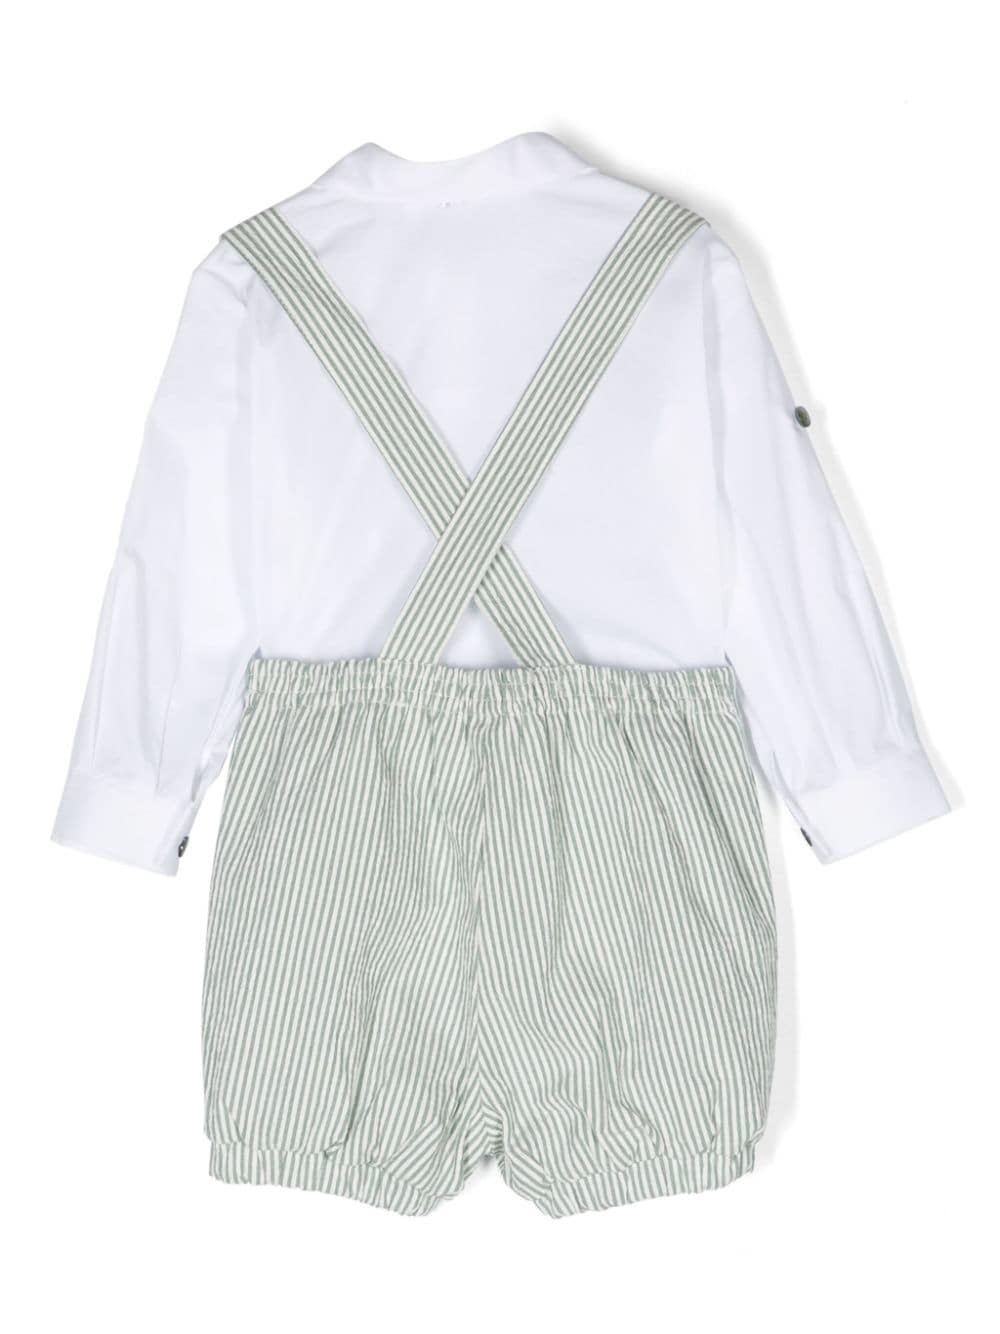 Elegant white and green outfit for newborns